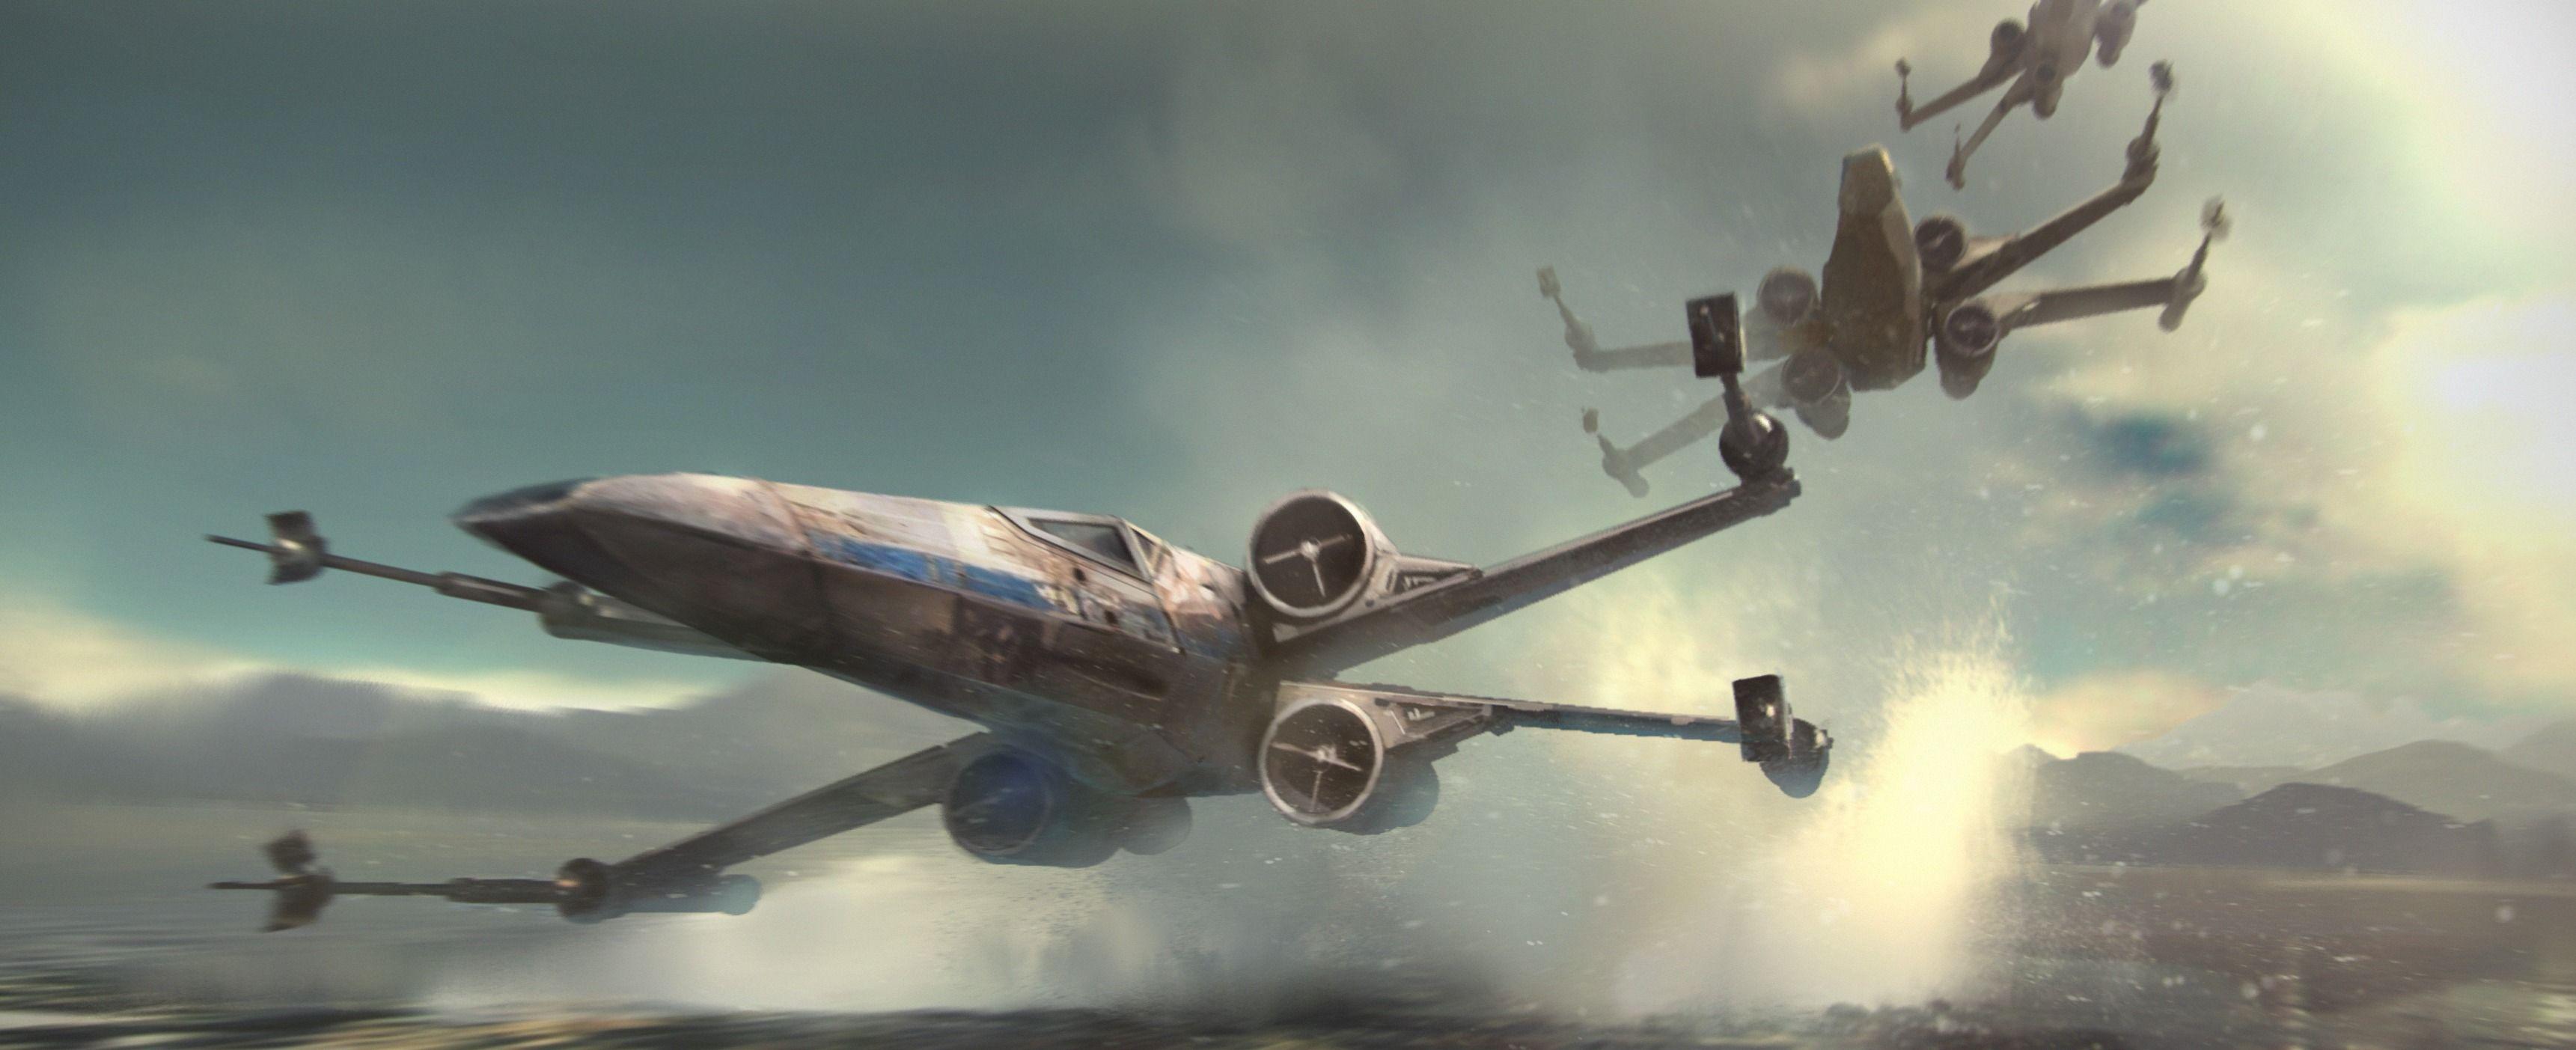 Star Wars X Wing Wallpapers Top Free Star Wars X Wing Backgrounds Wallpaperaccess